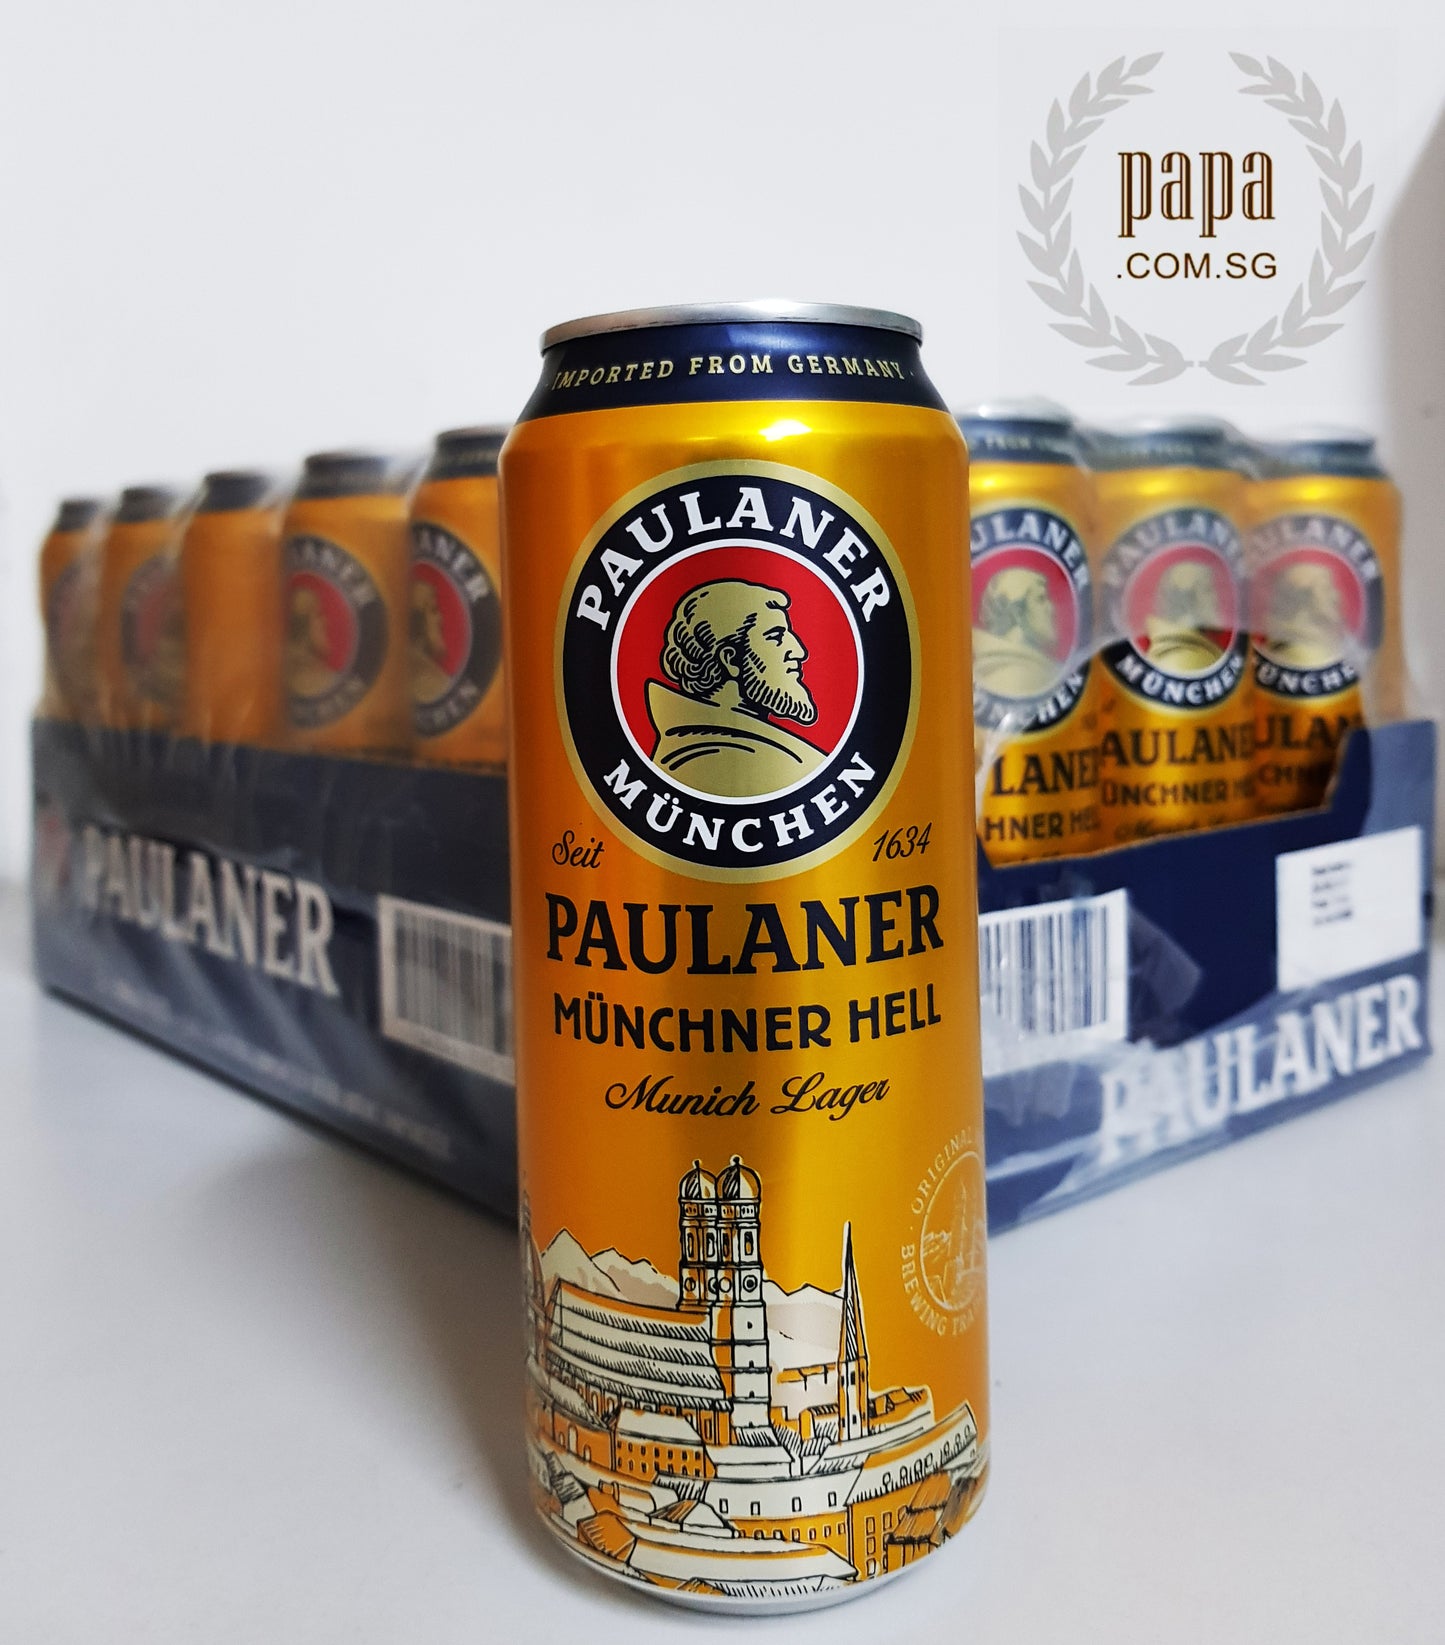 Paulaner Hells Lager - 4.9% abv - Canned Version